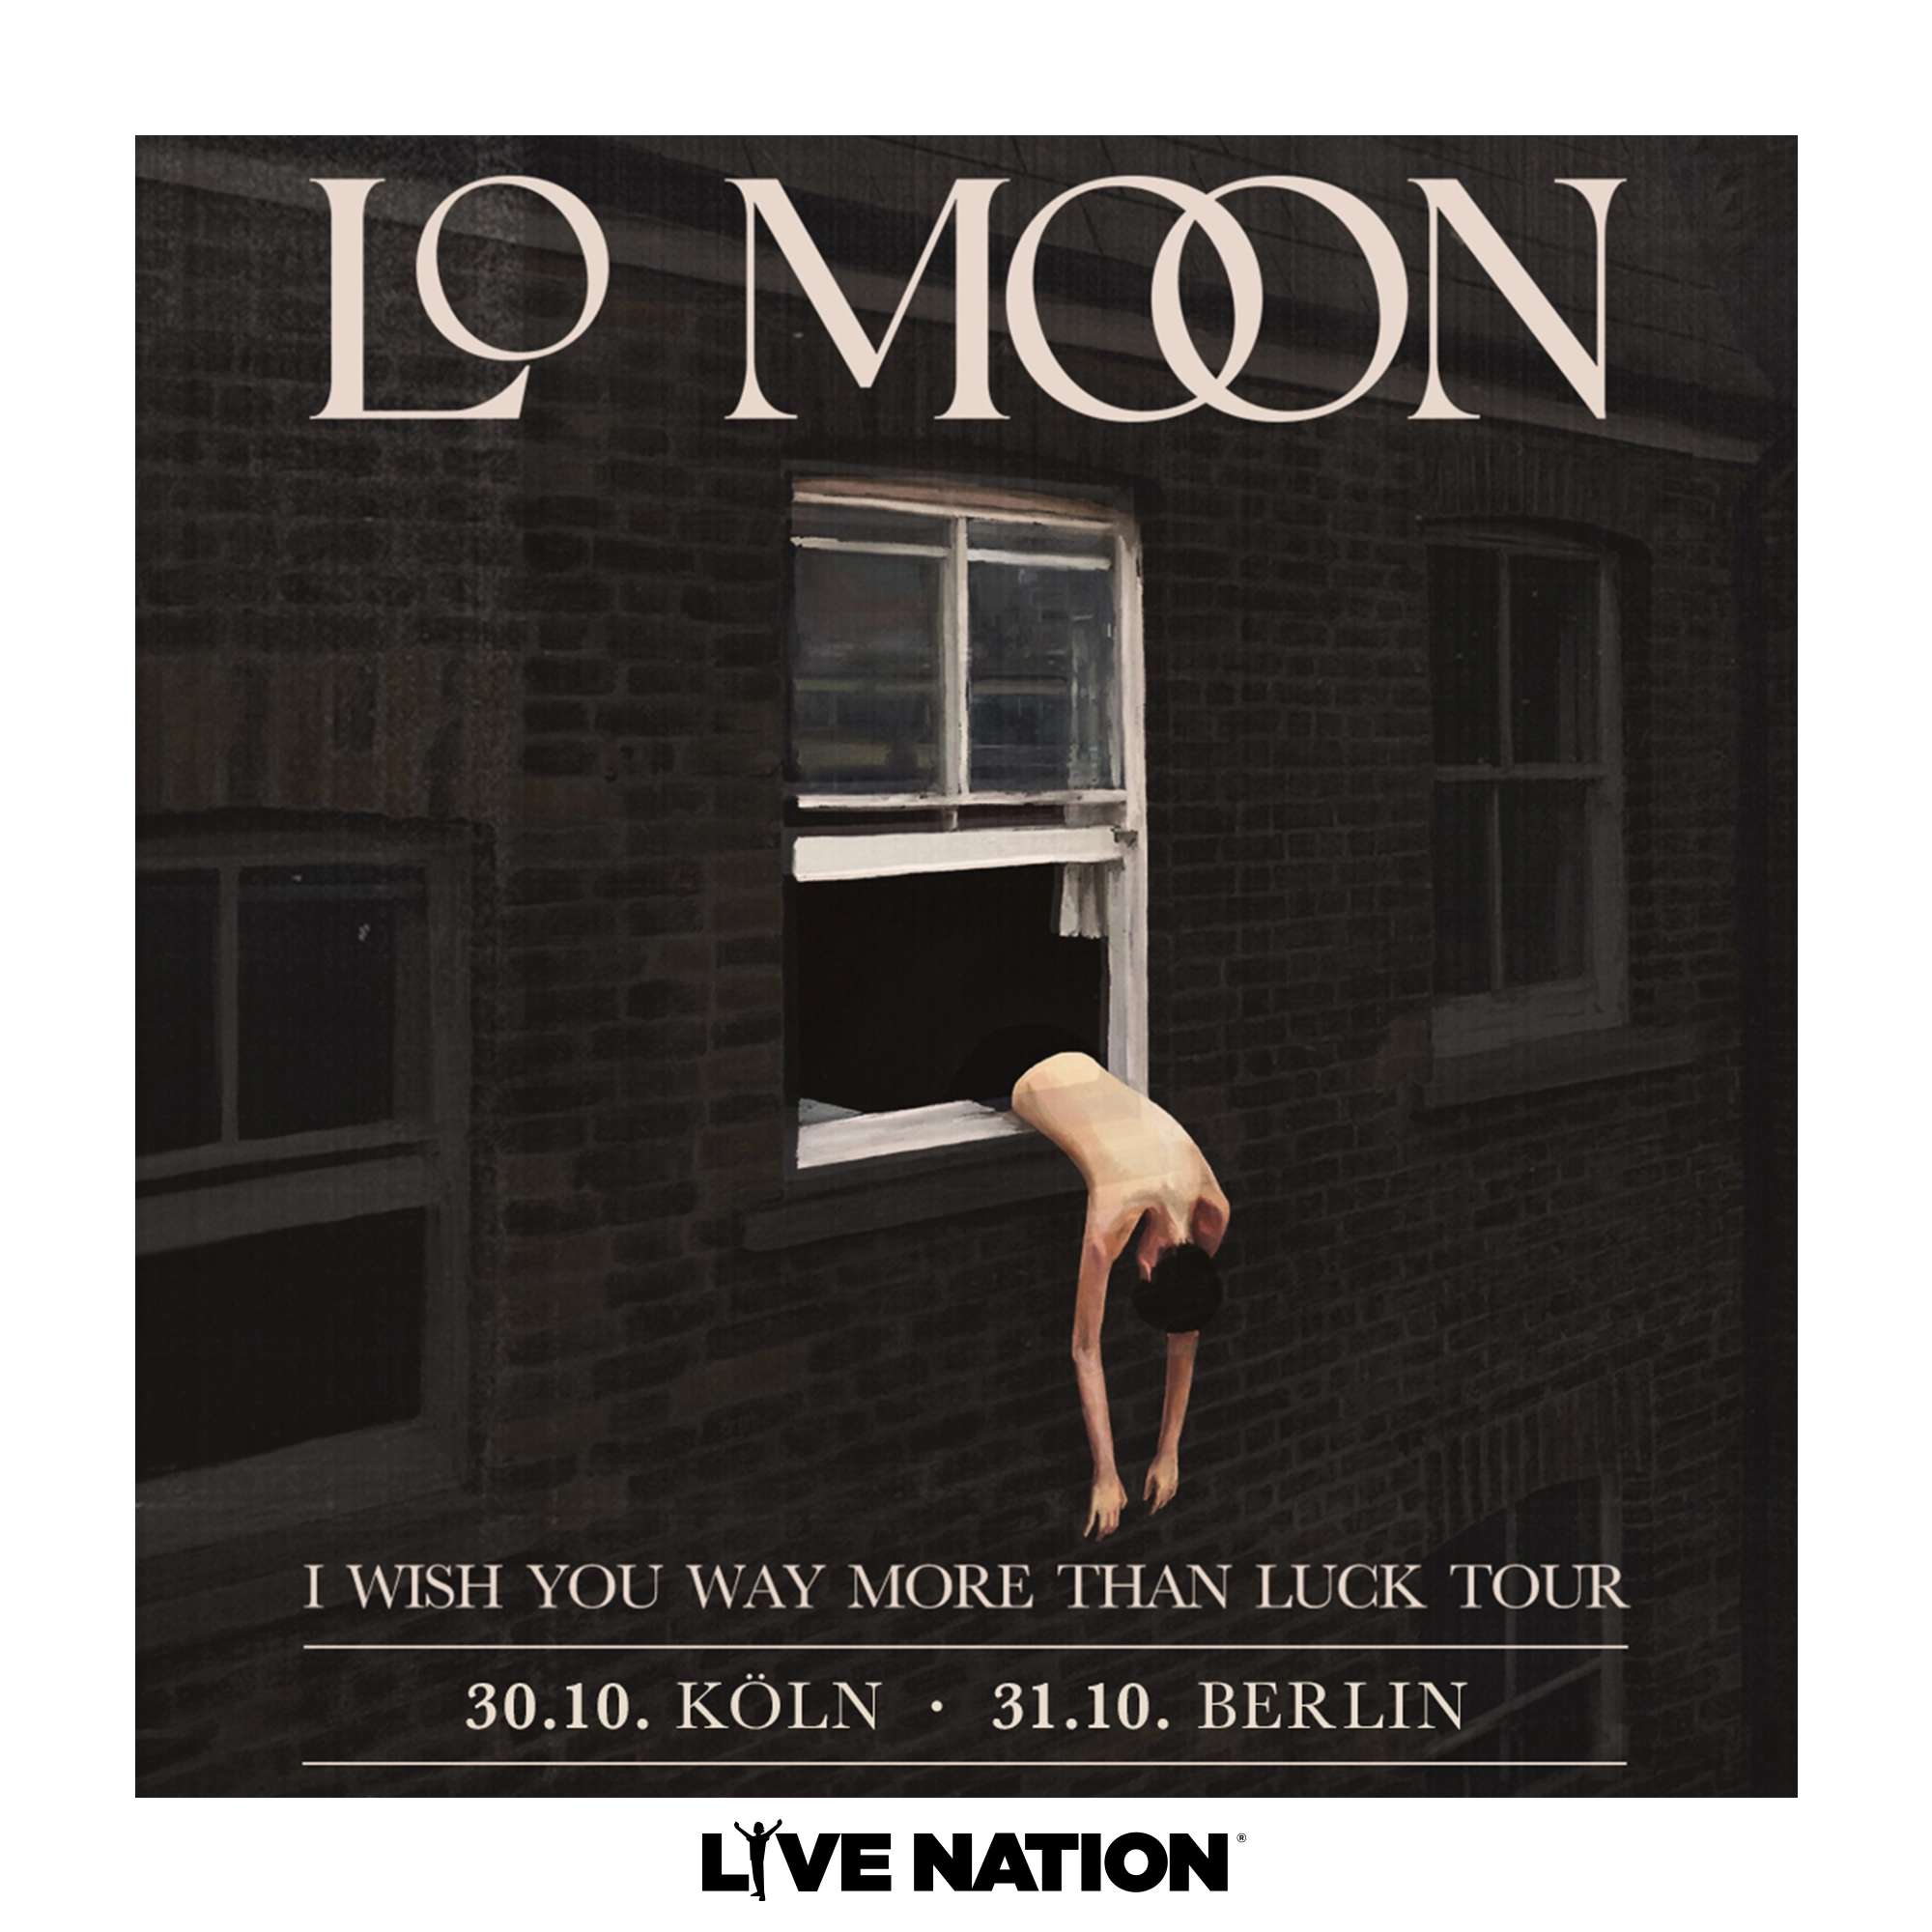 Lo Moon at Luxor Cologne Tickets